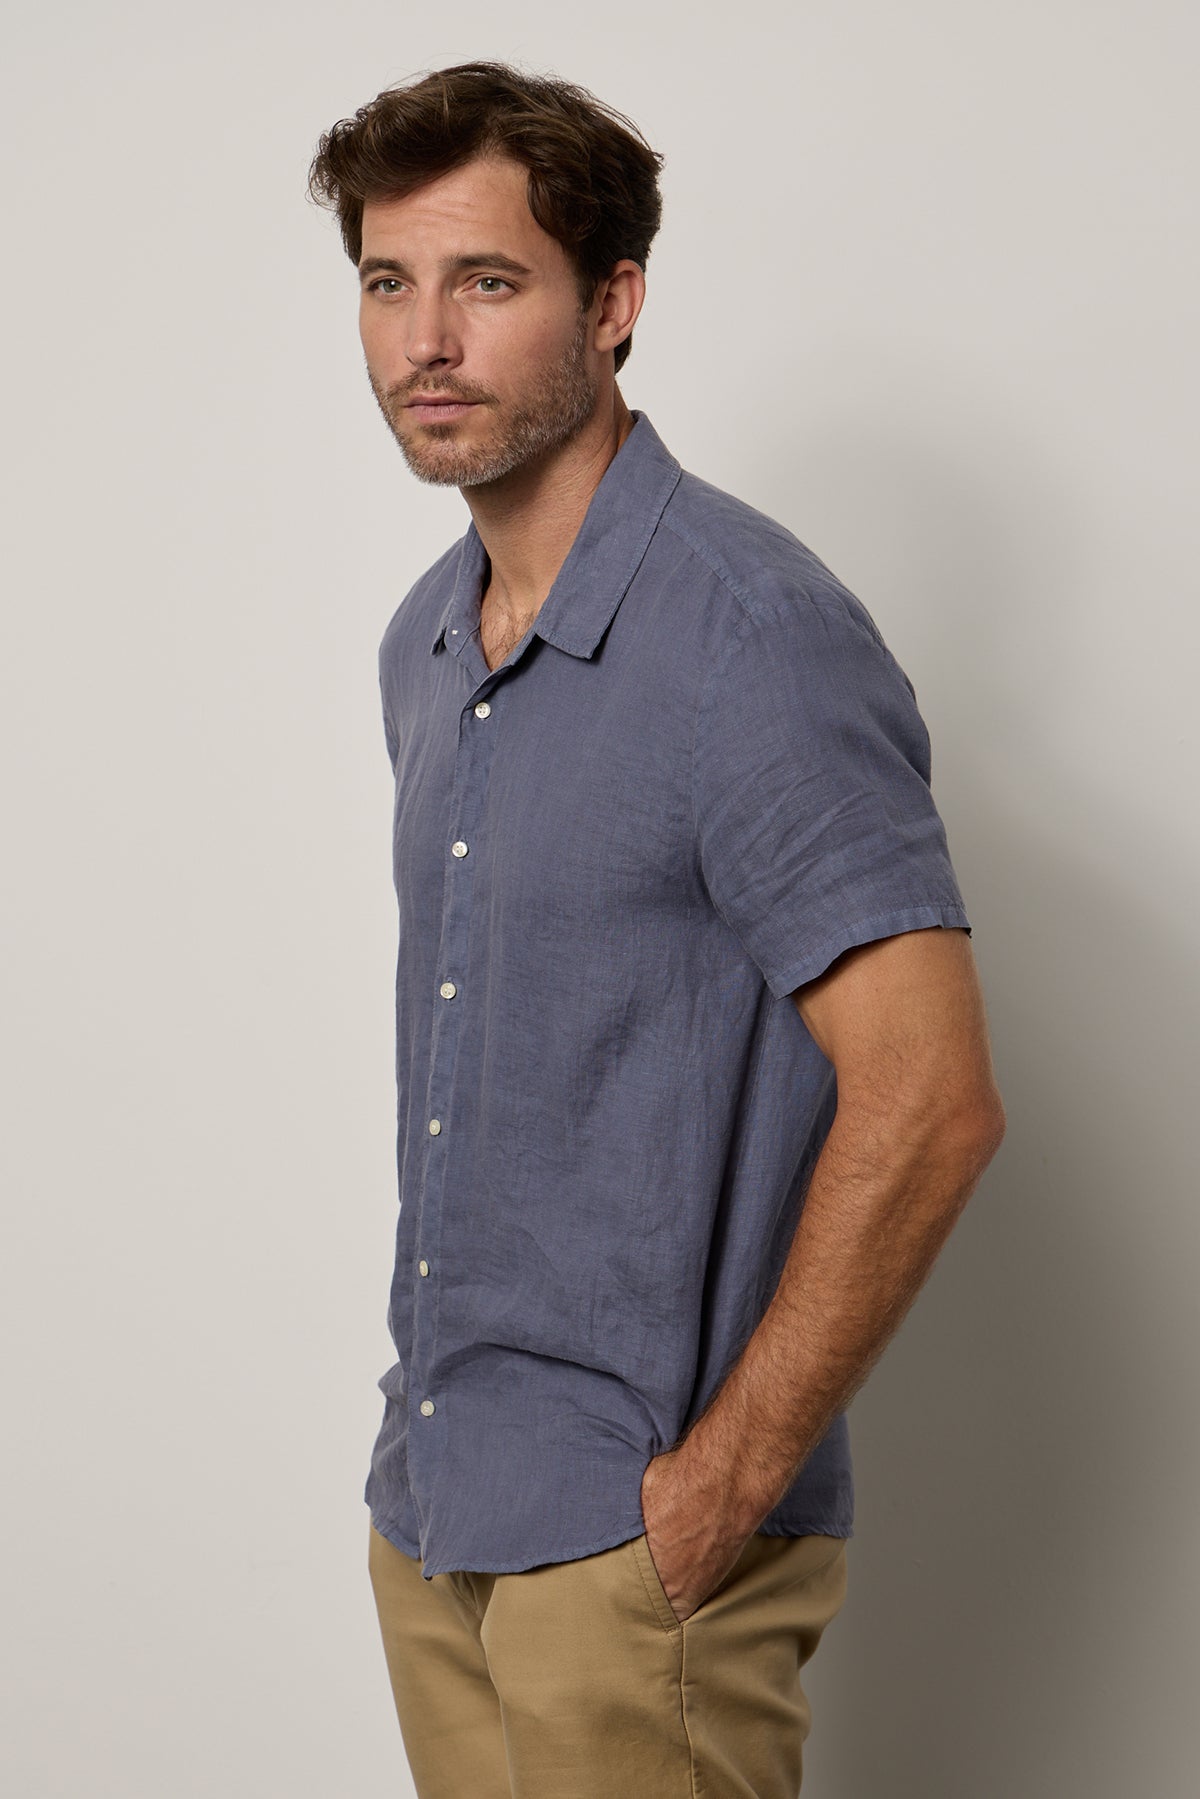 Mackie Button-Up Shirt in baltic blue linen with khaki pants side-26343174930625